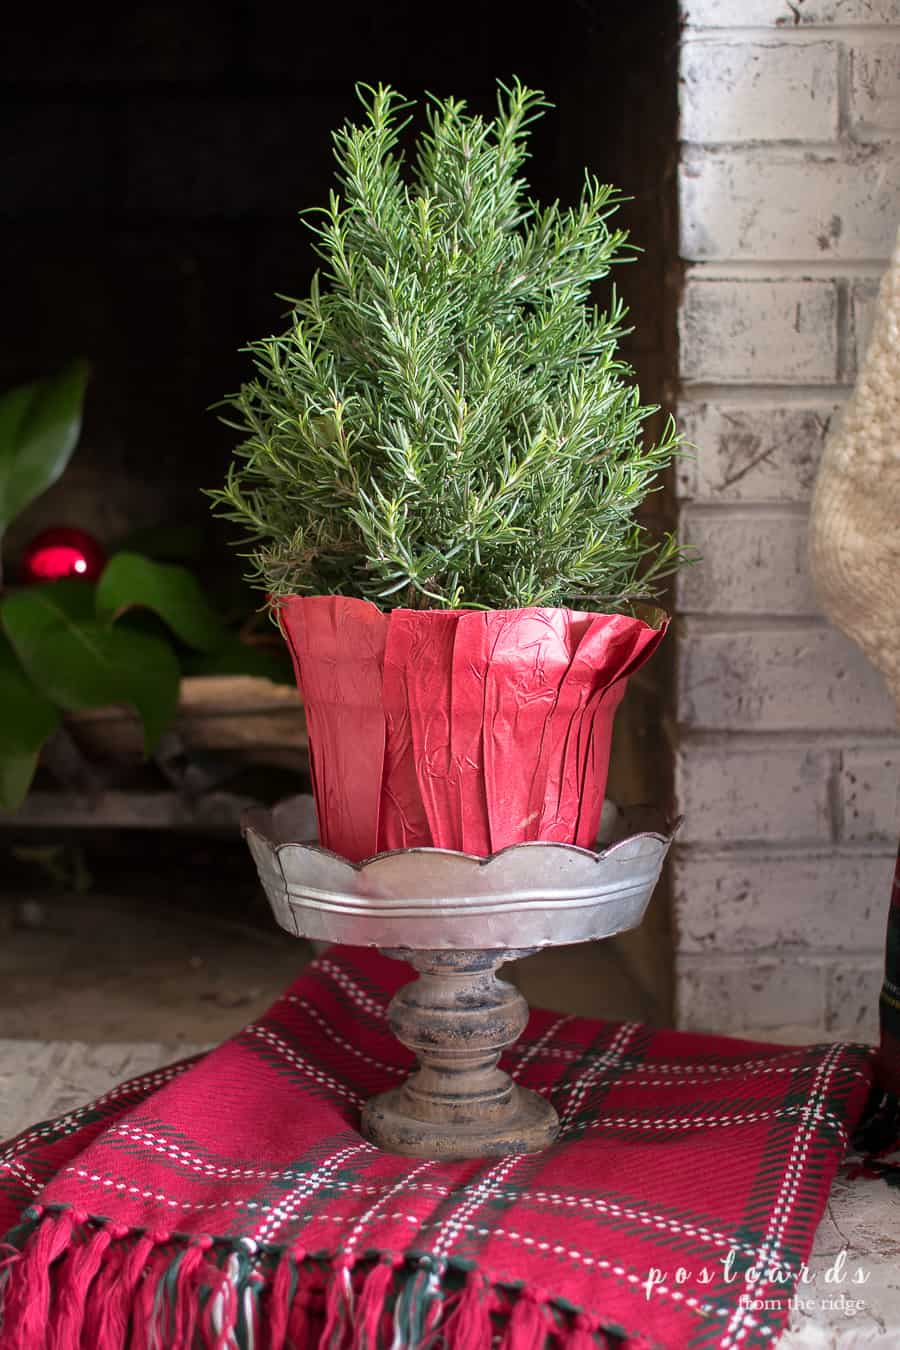 rosemary tree on a pedestal and plaid blanket